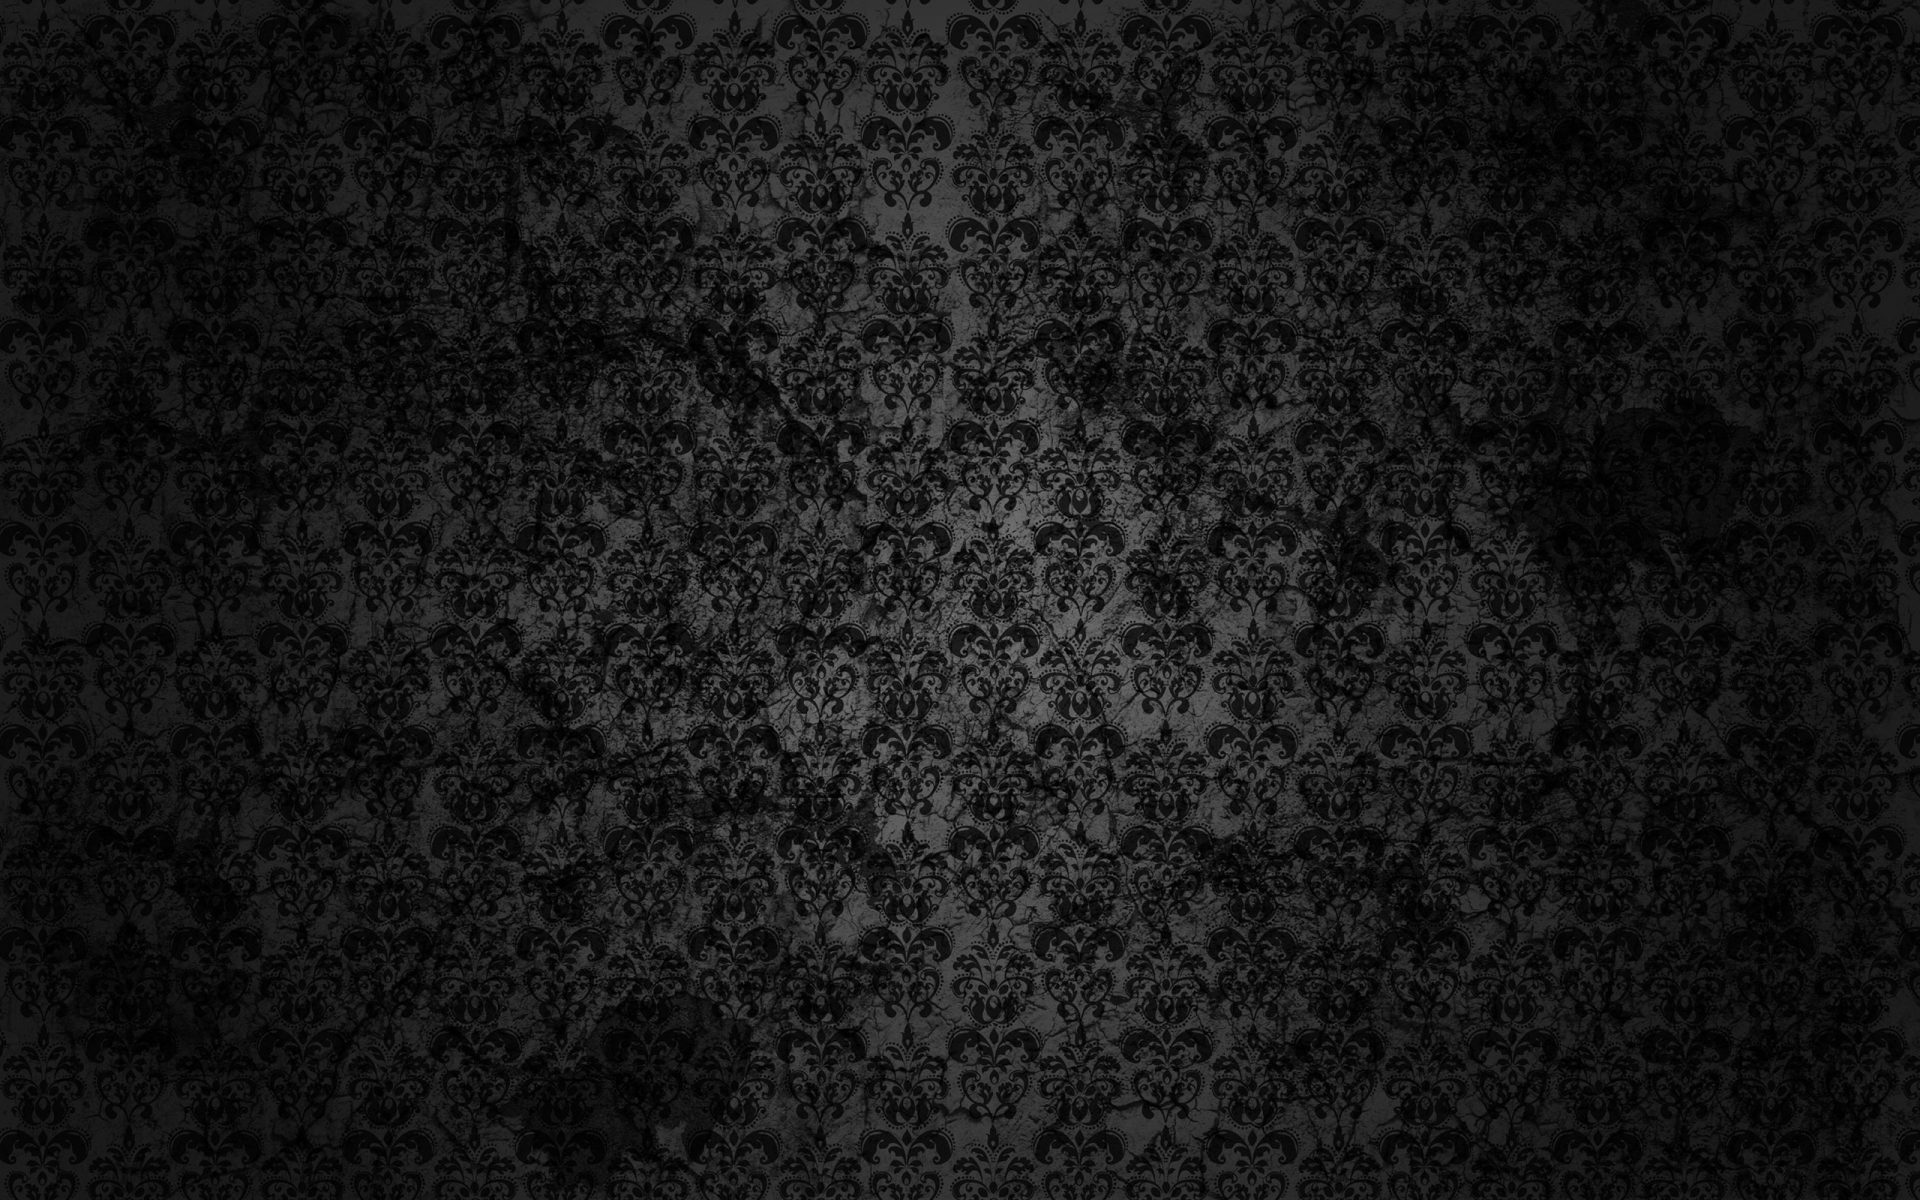 Black Floral Grunge for 1920 x 1200 widescreen resolution